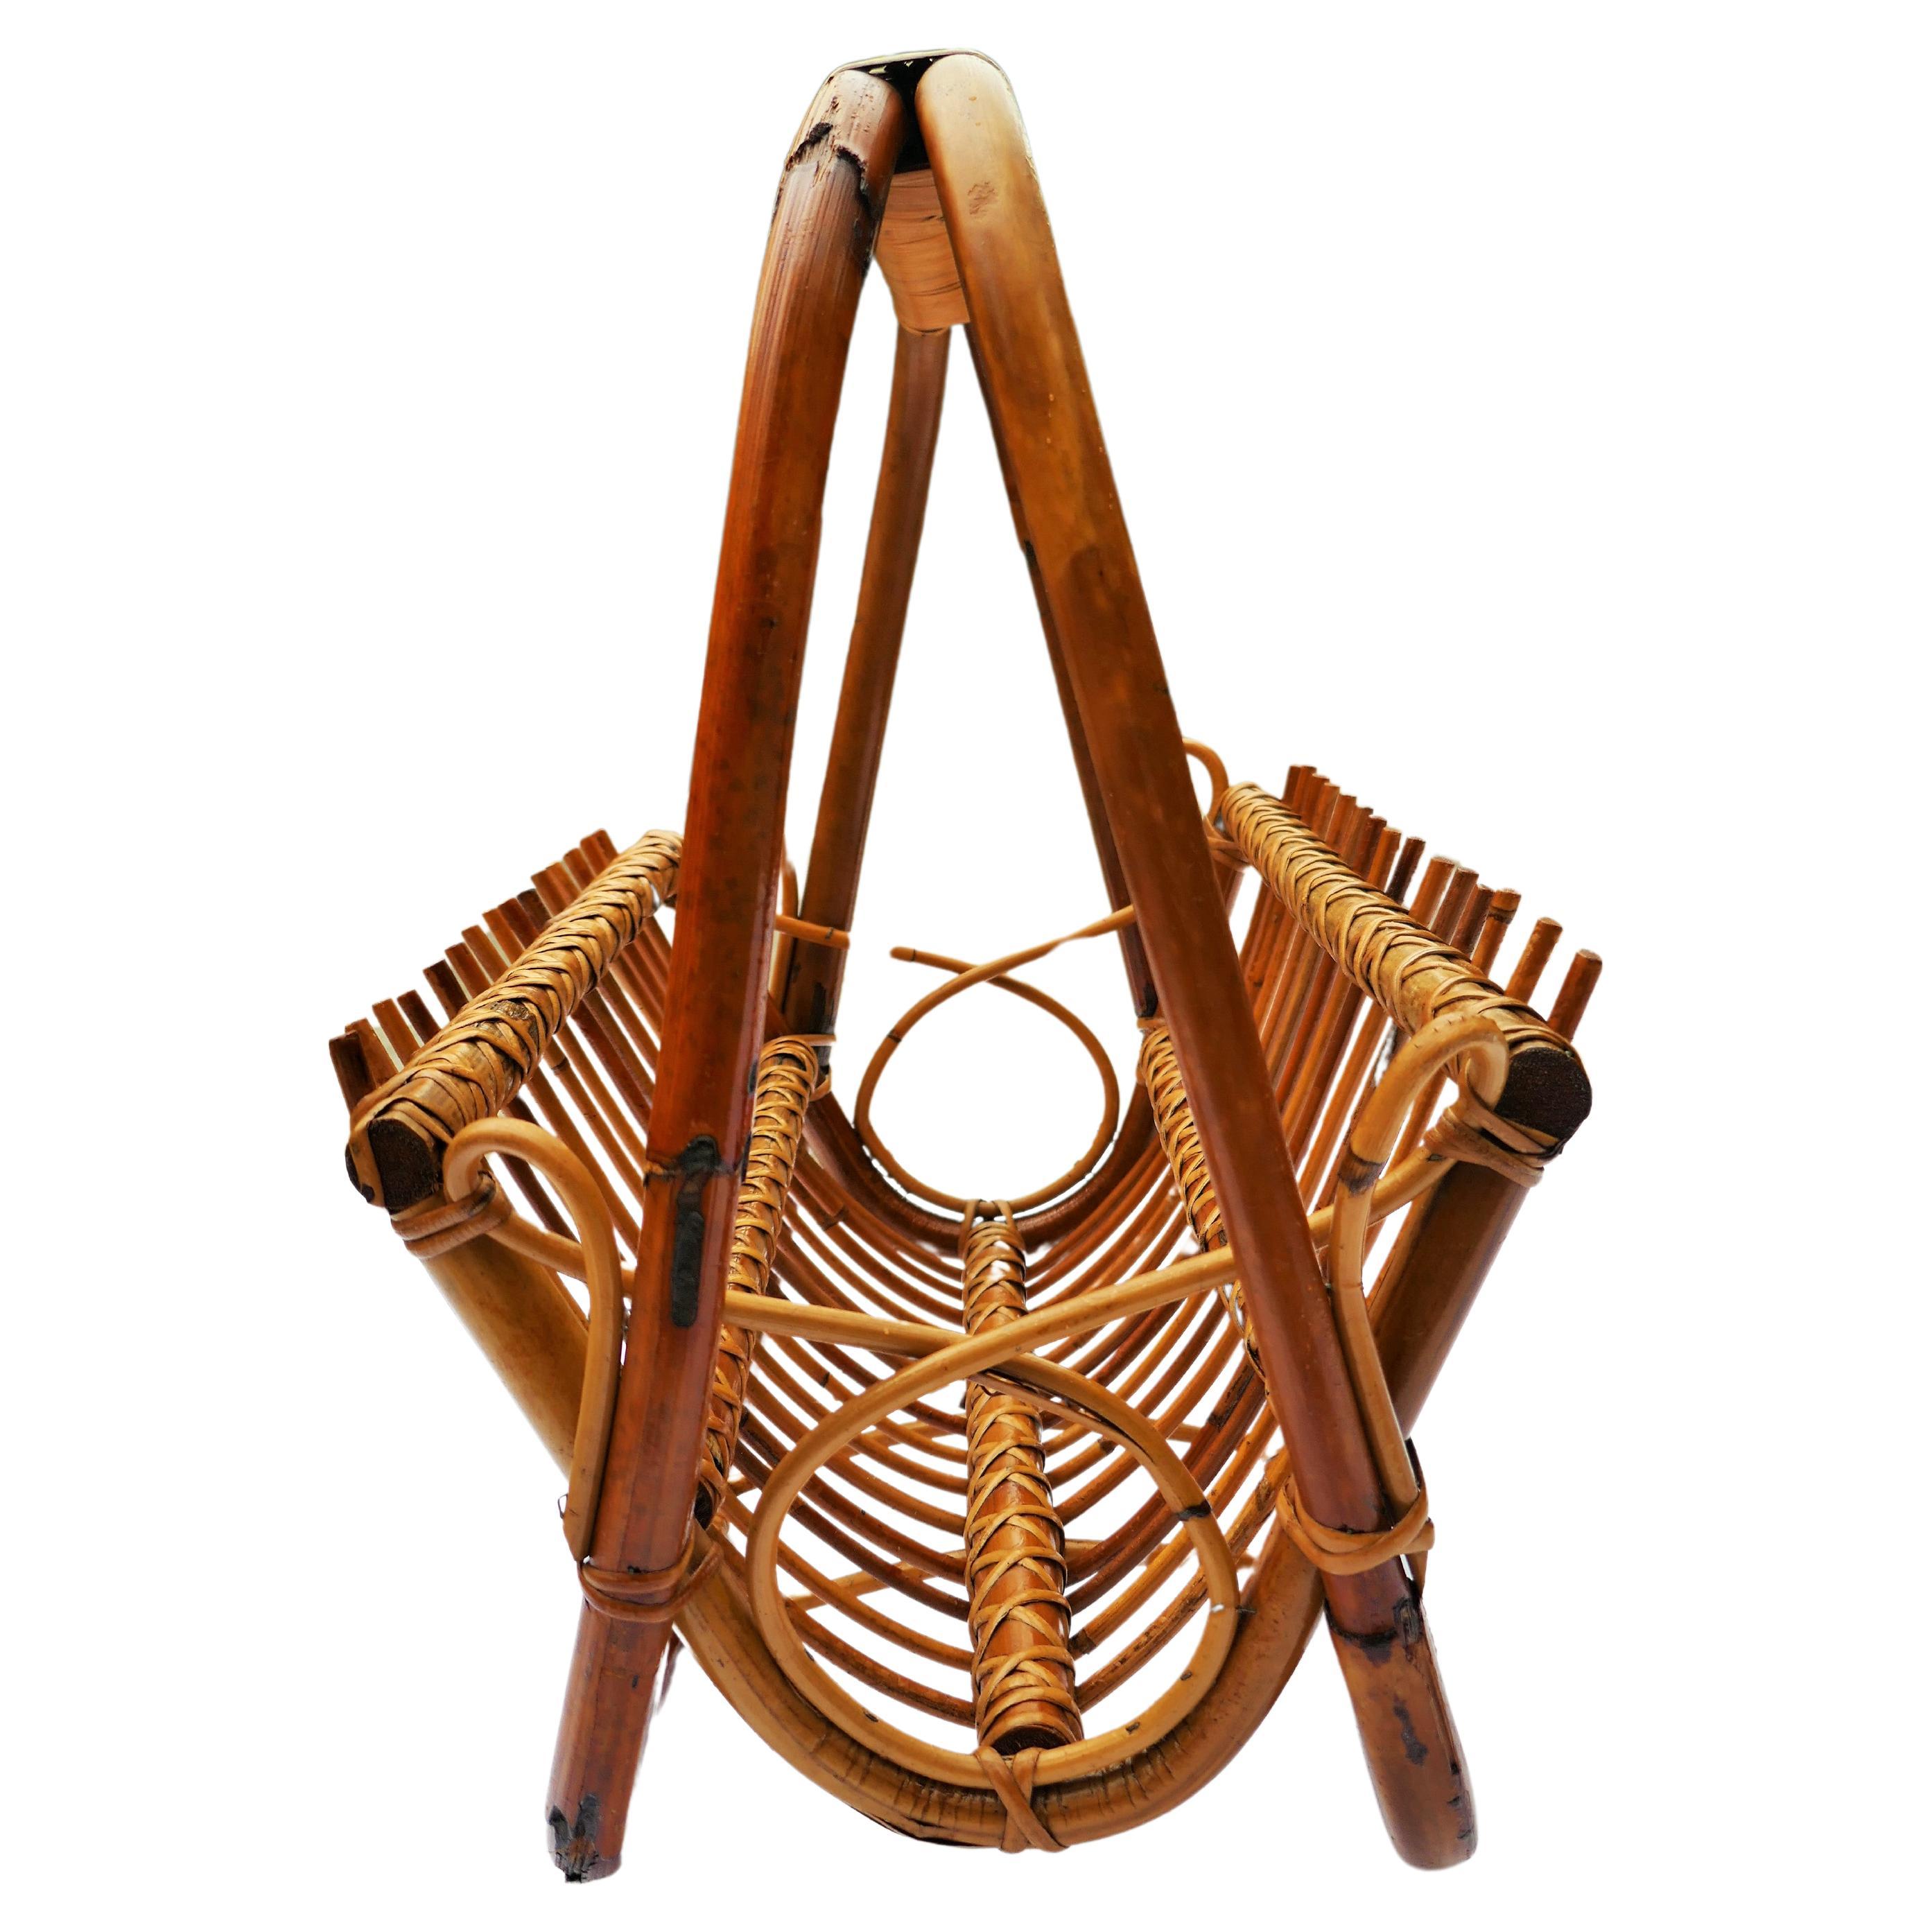 Bamboo rattan magazine rack attributed to Bonacina In Good Condition For Sale In Lugo, IT